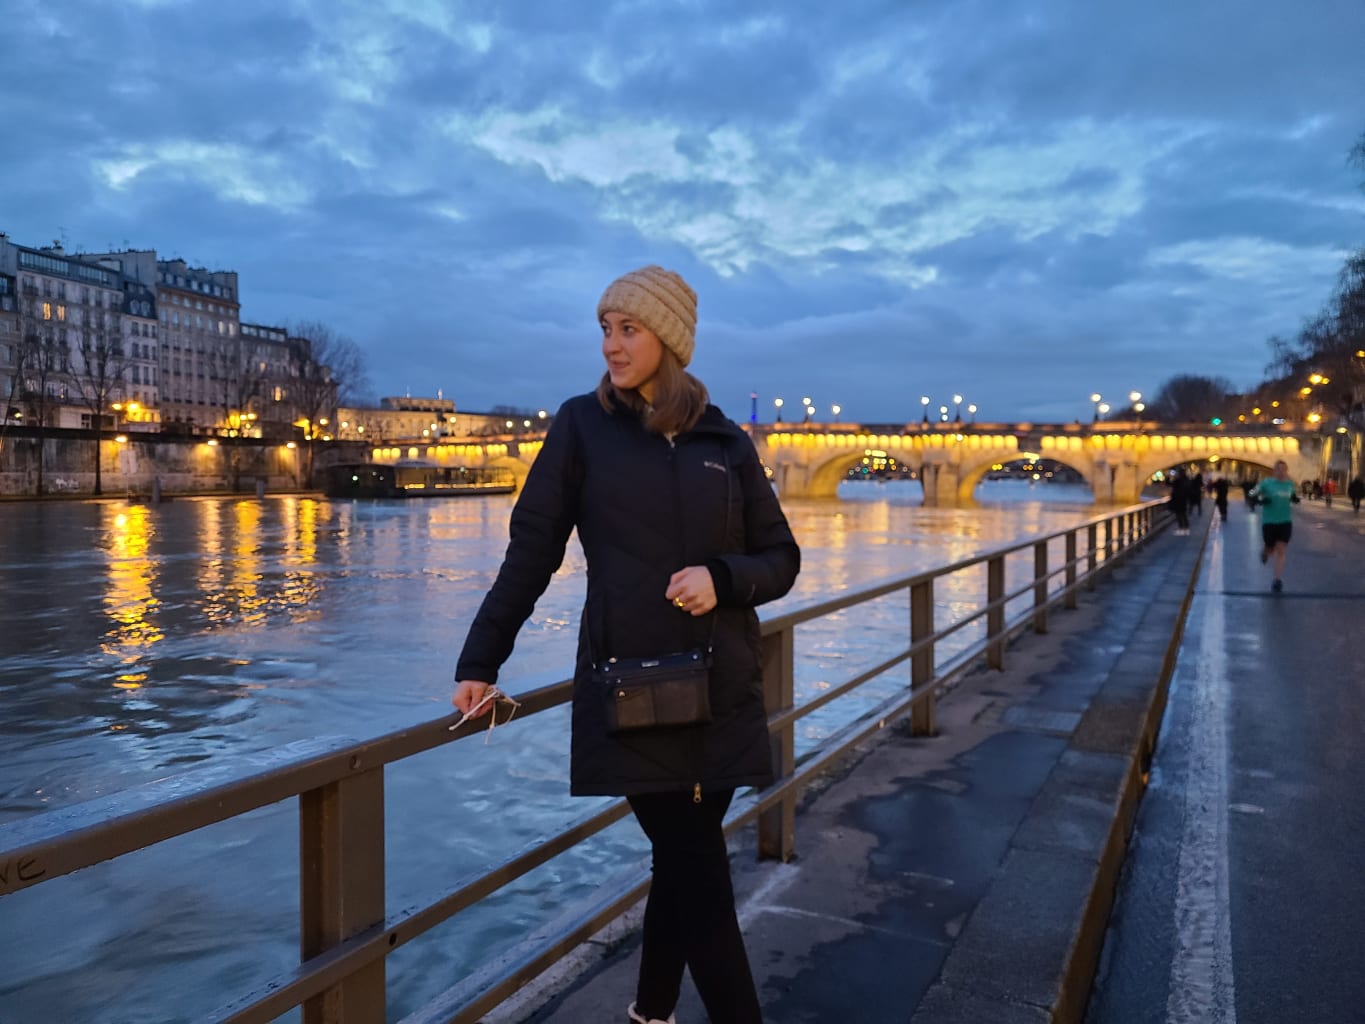 A student standing near a river in Paris during the evening.